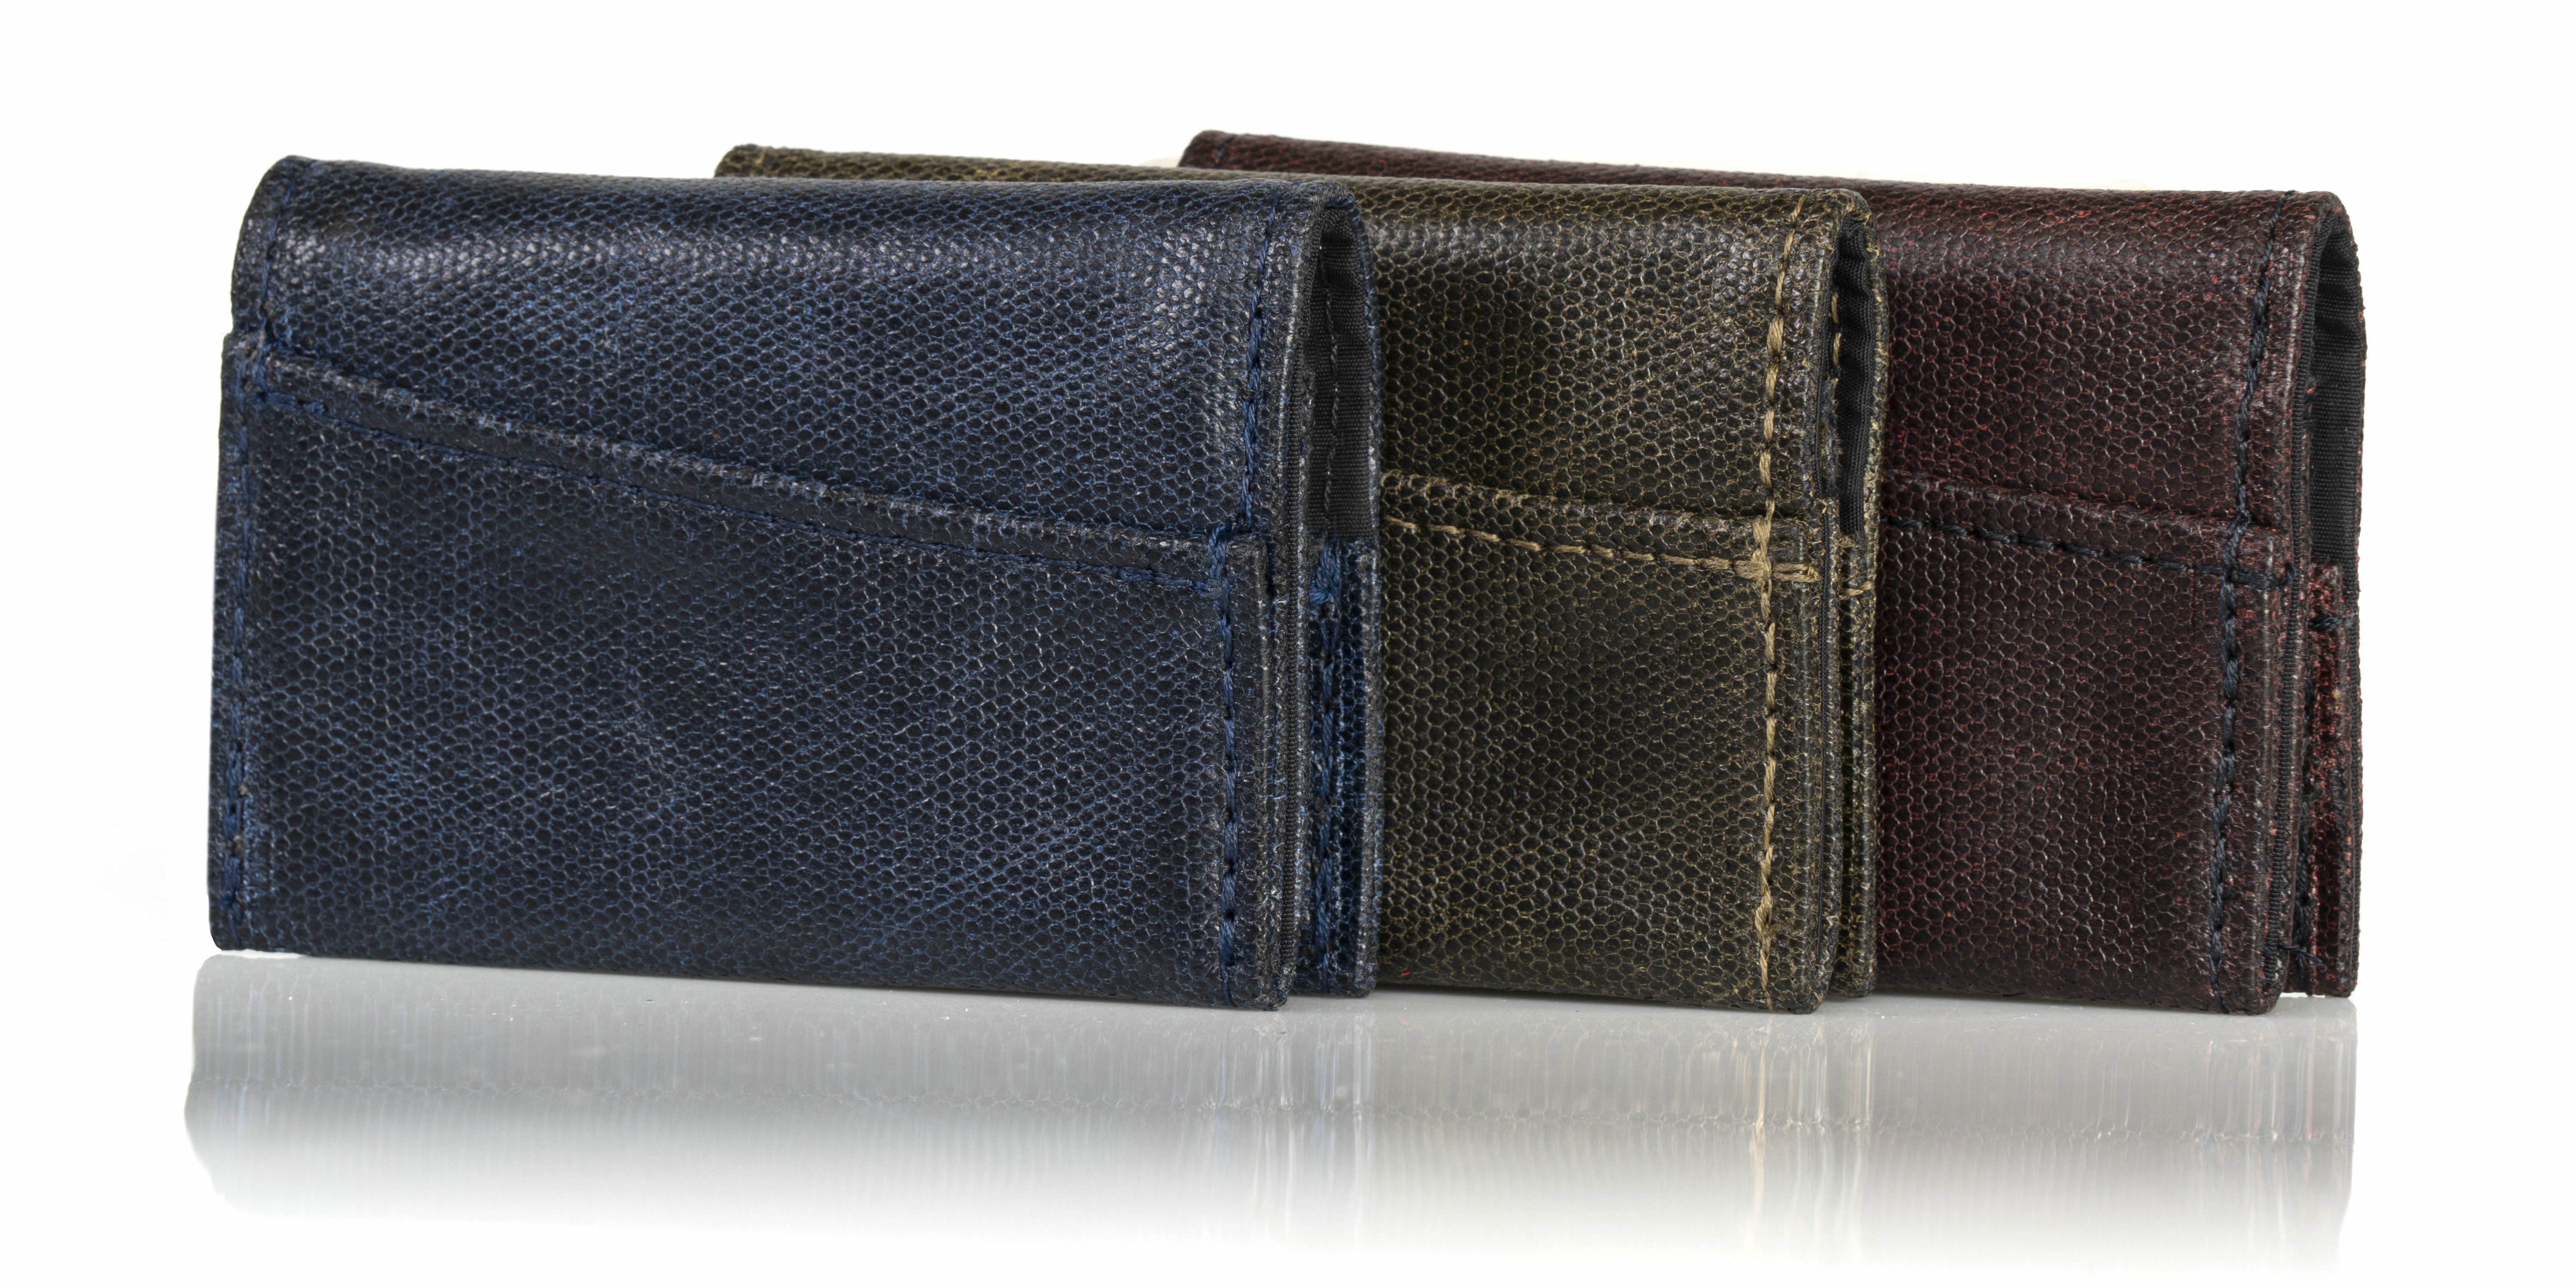 Minimo Leather Minimalist Wallets up for pre-order